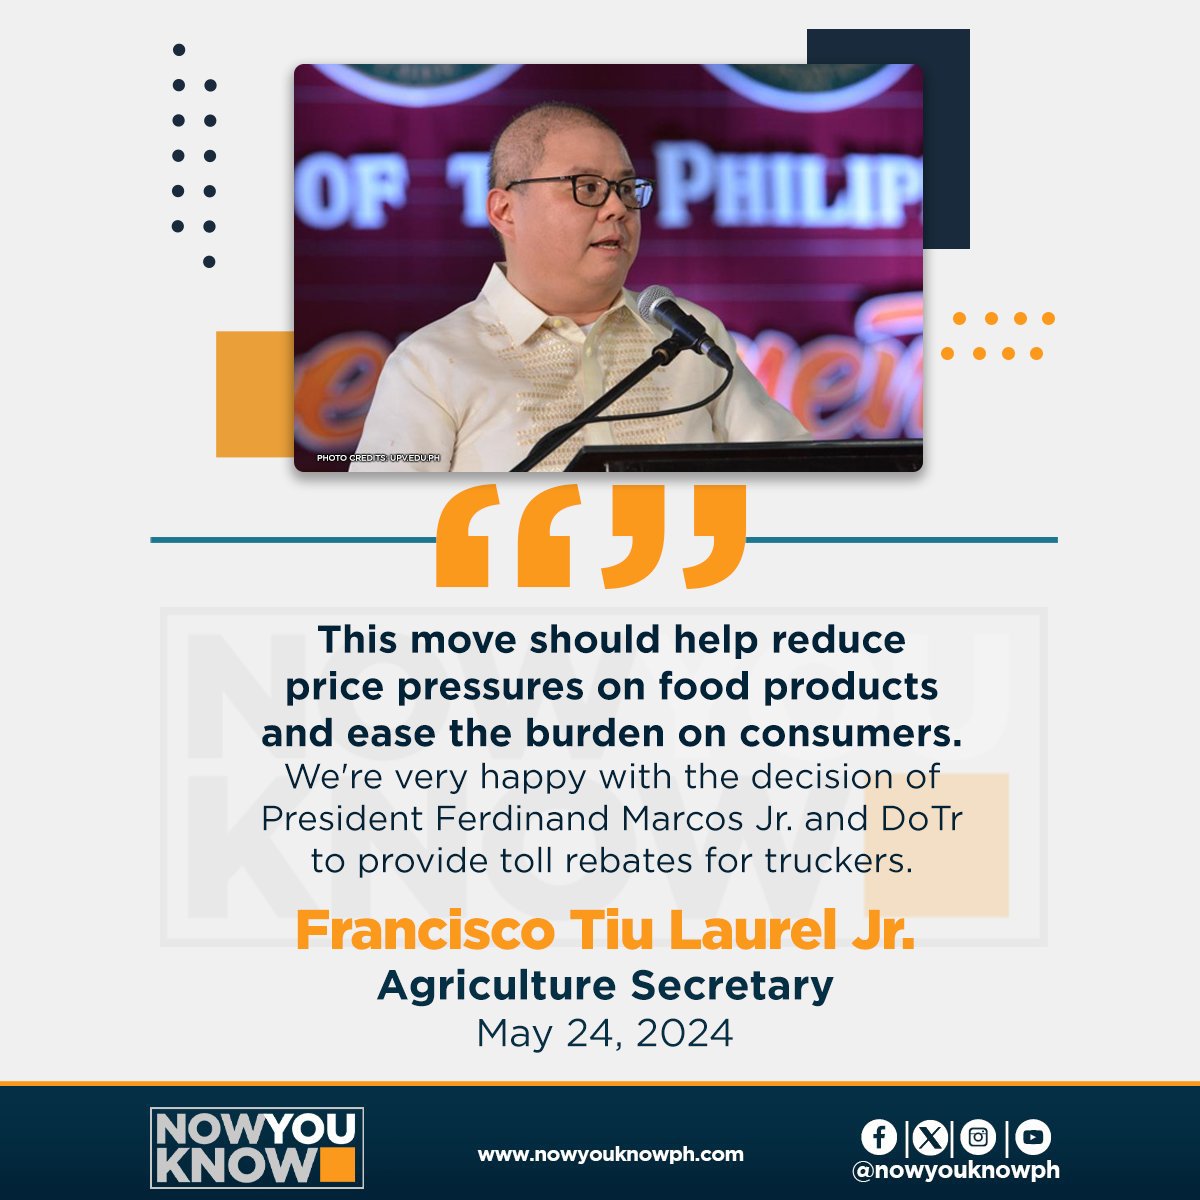 The Department of Agriculture (DA) is expecting the recent move to grant toll rate increase rebates to trucks transporting agricultural products to reduce inflationary pressures on food products. READ tinyurl.com/y4ssx76d 📰 GMA NEWS ONLINE